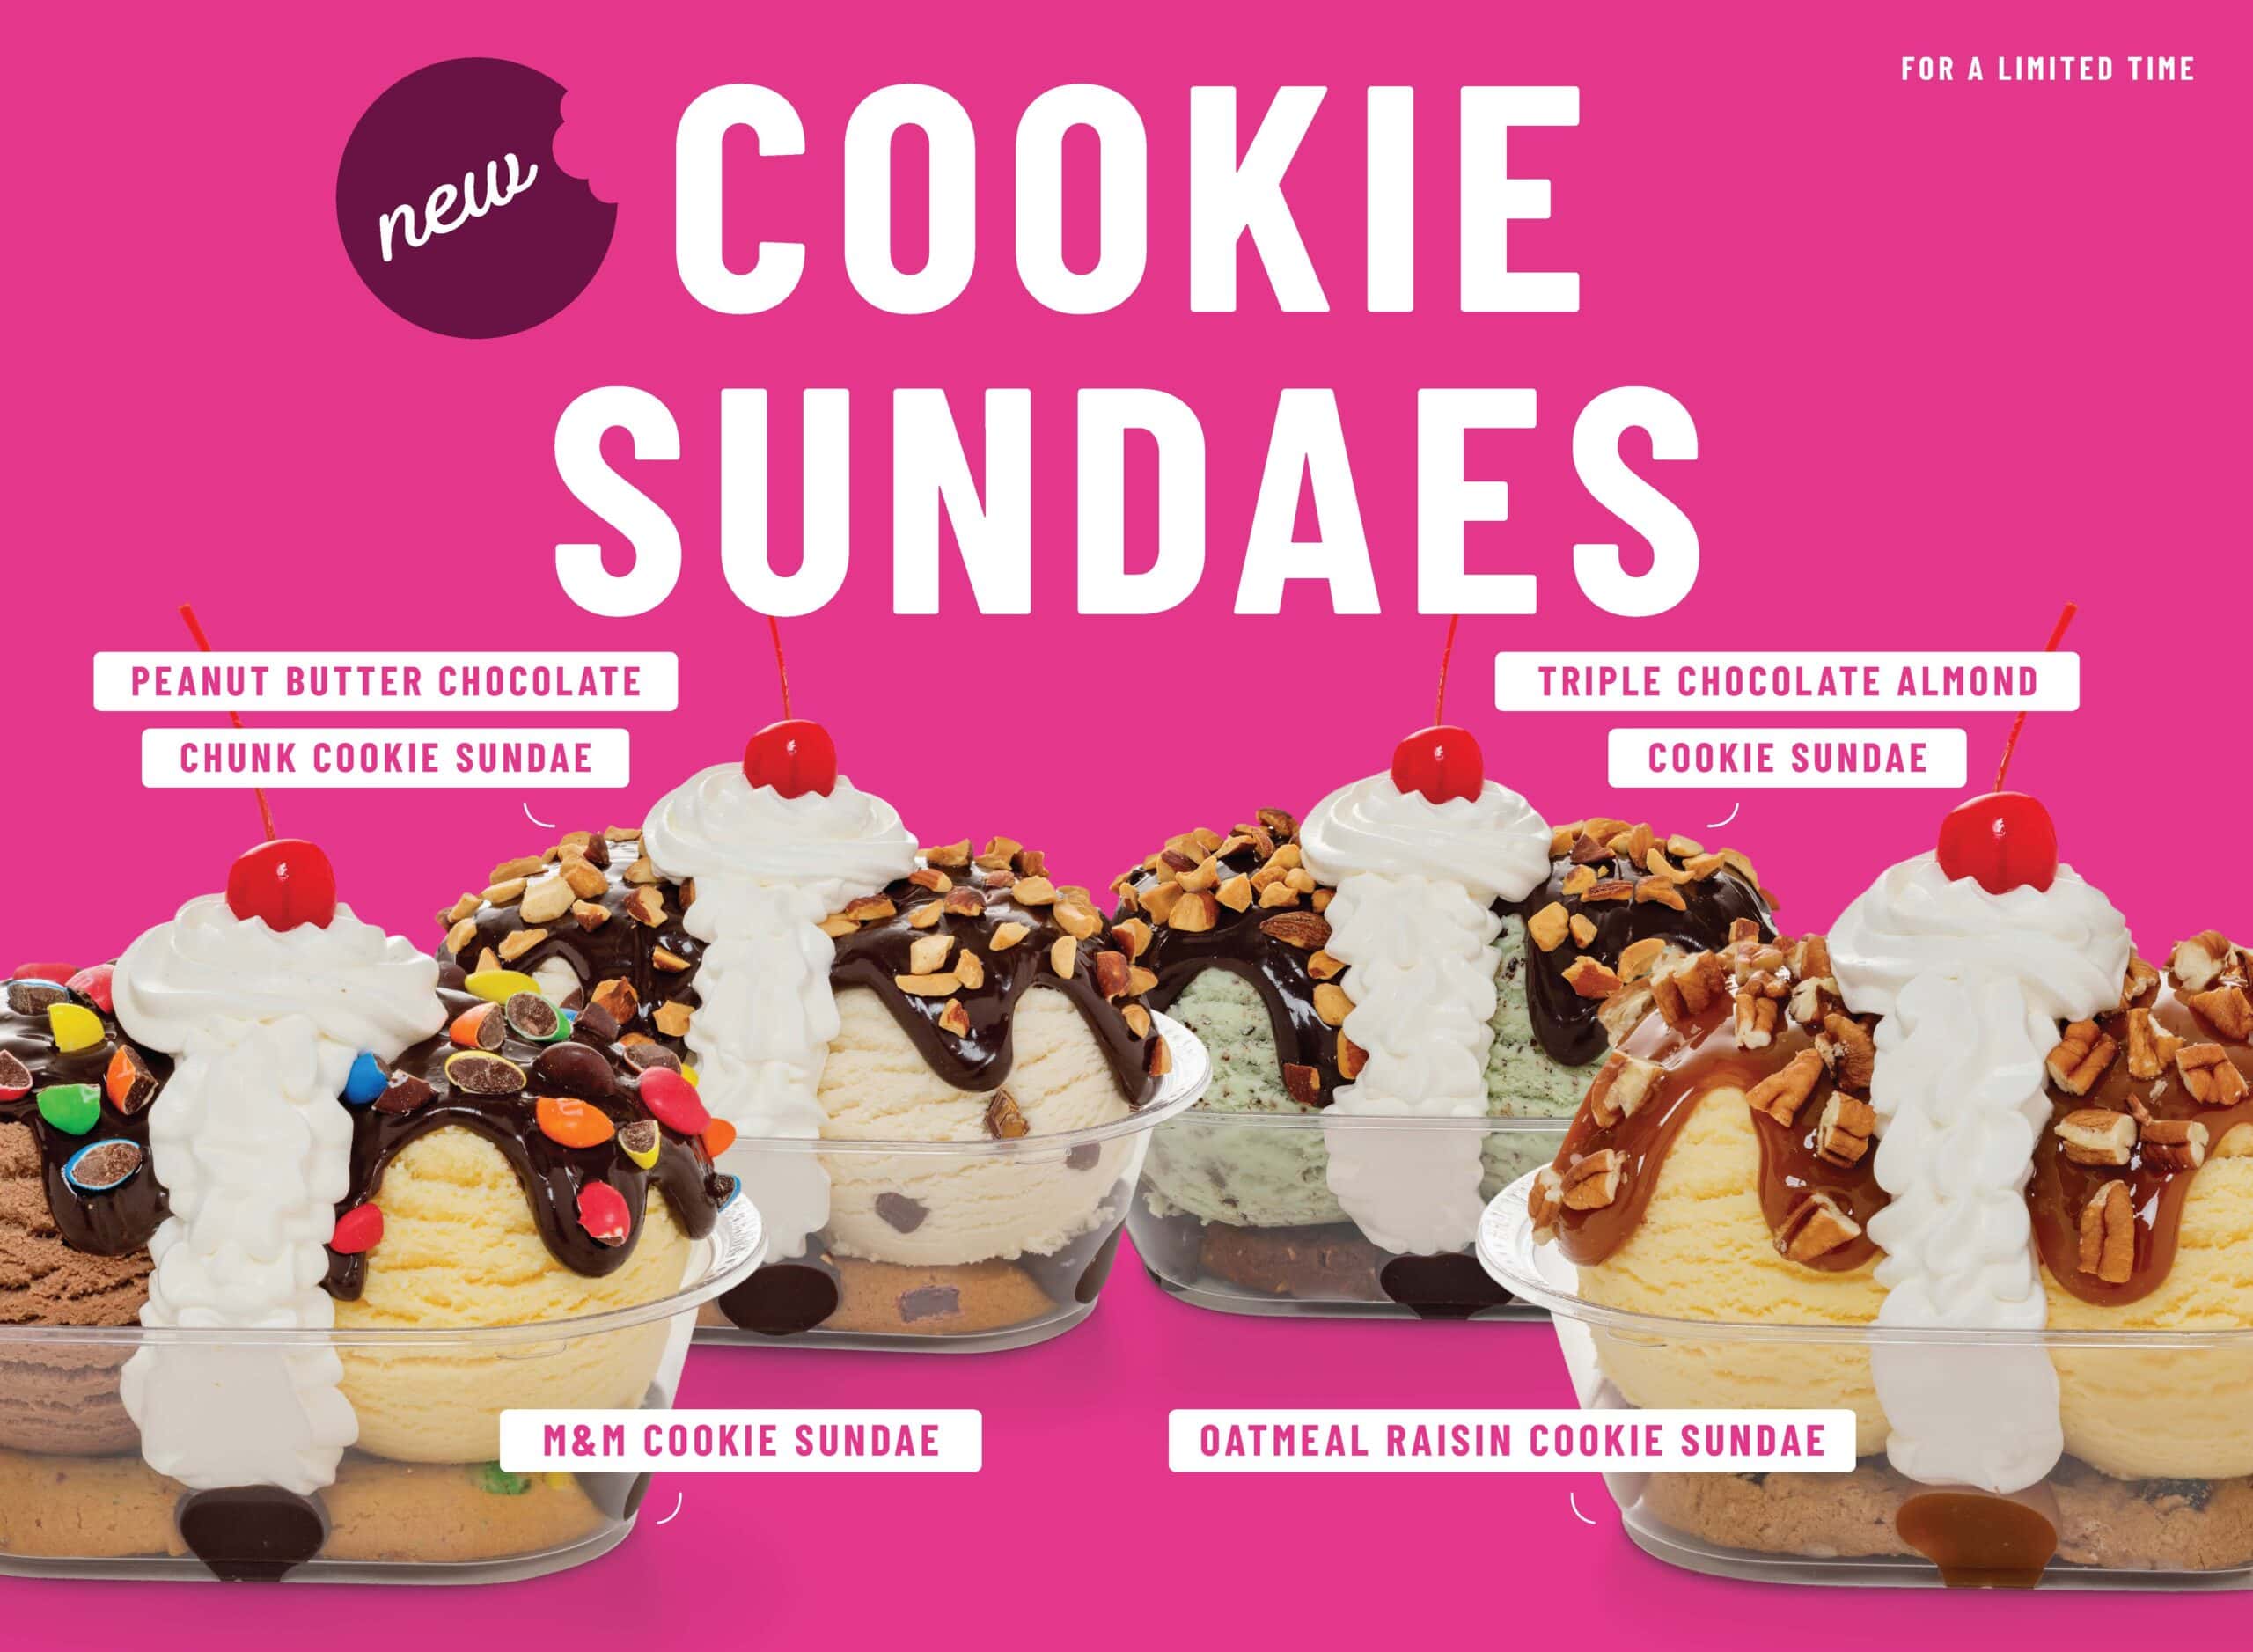 pink background with cookie sundaes and text